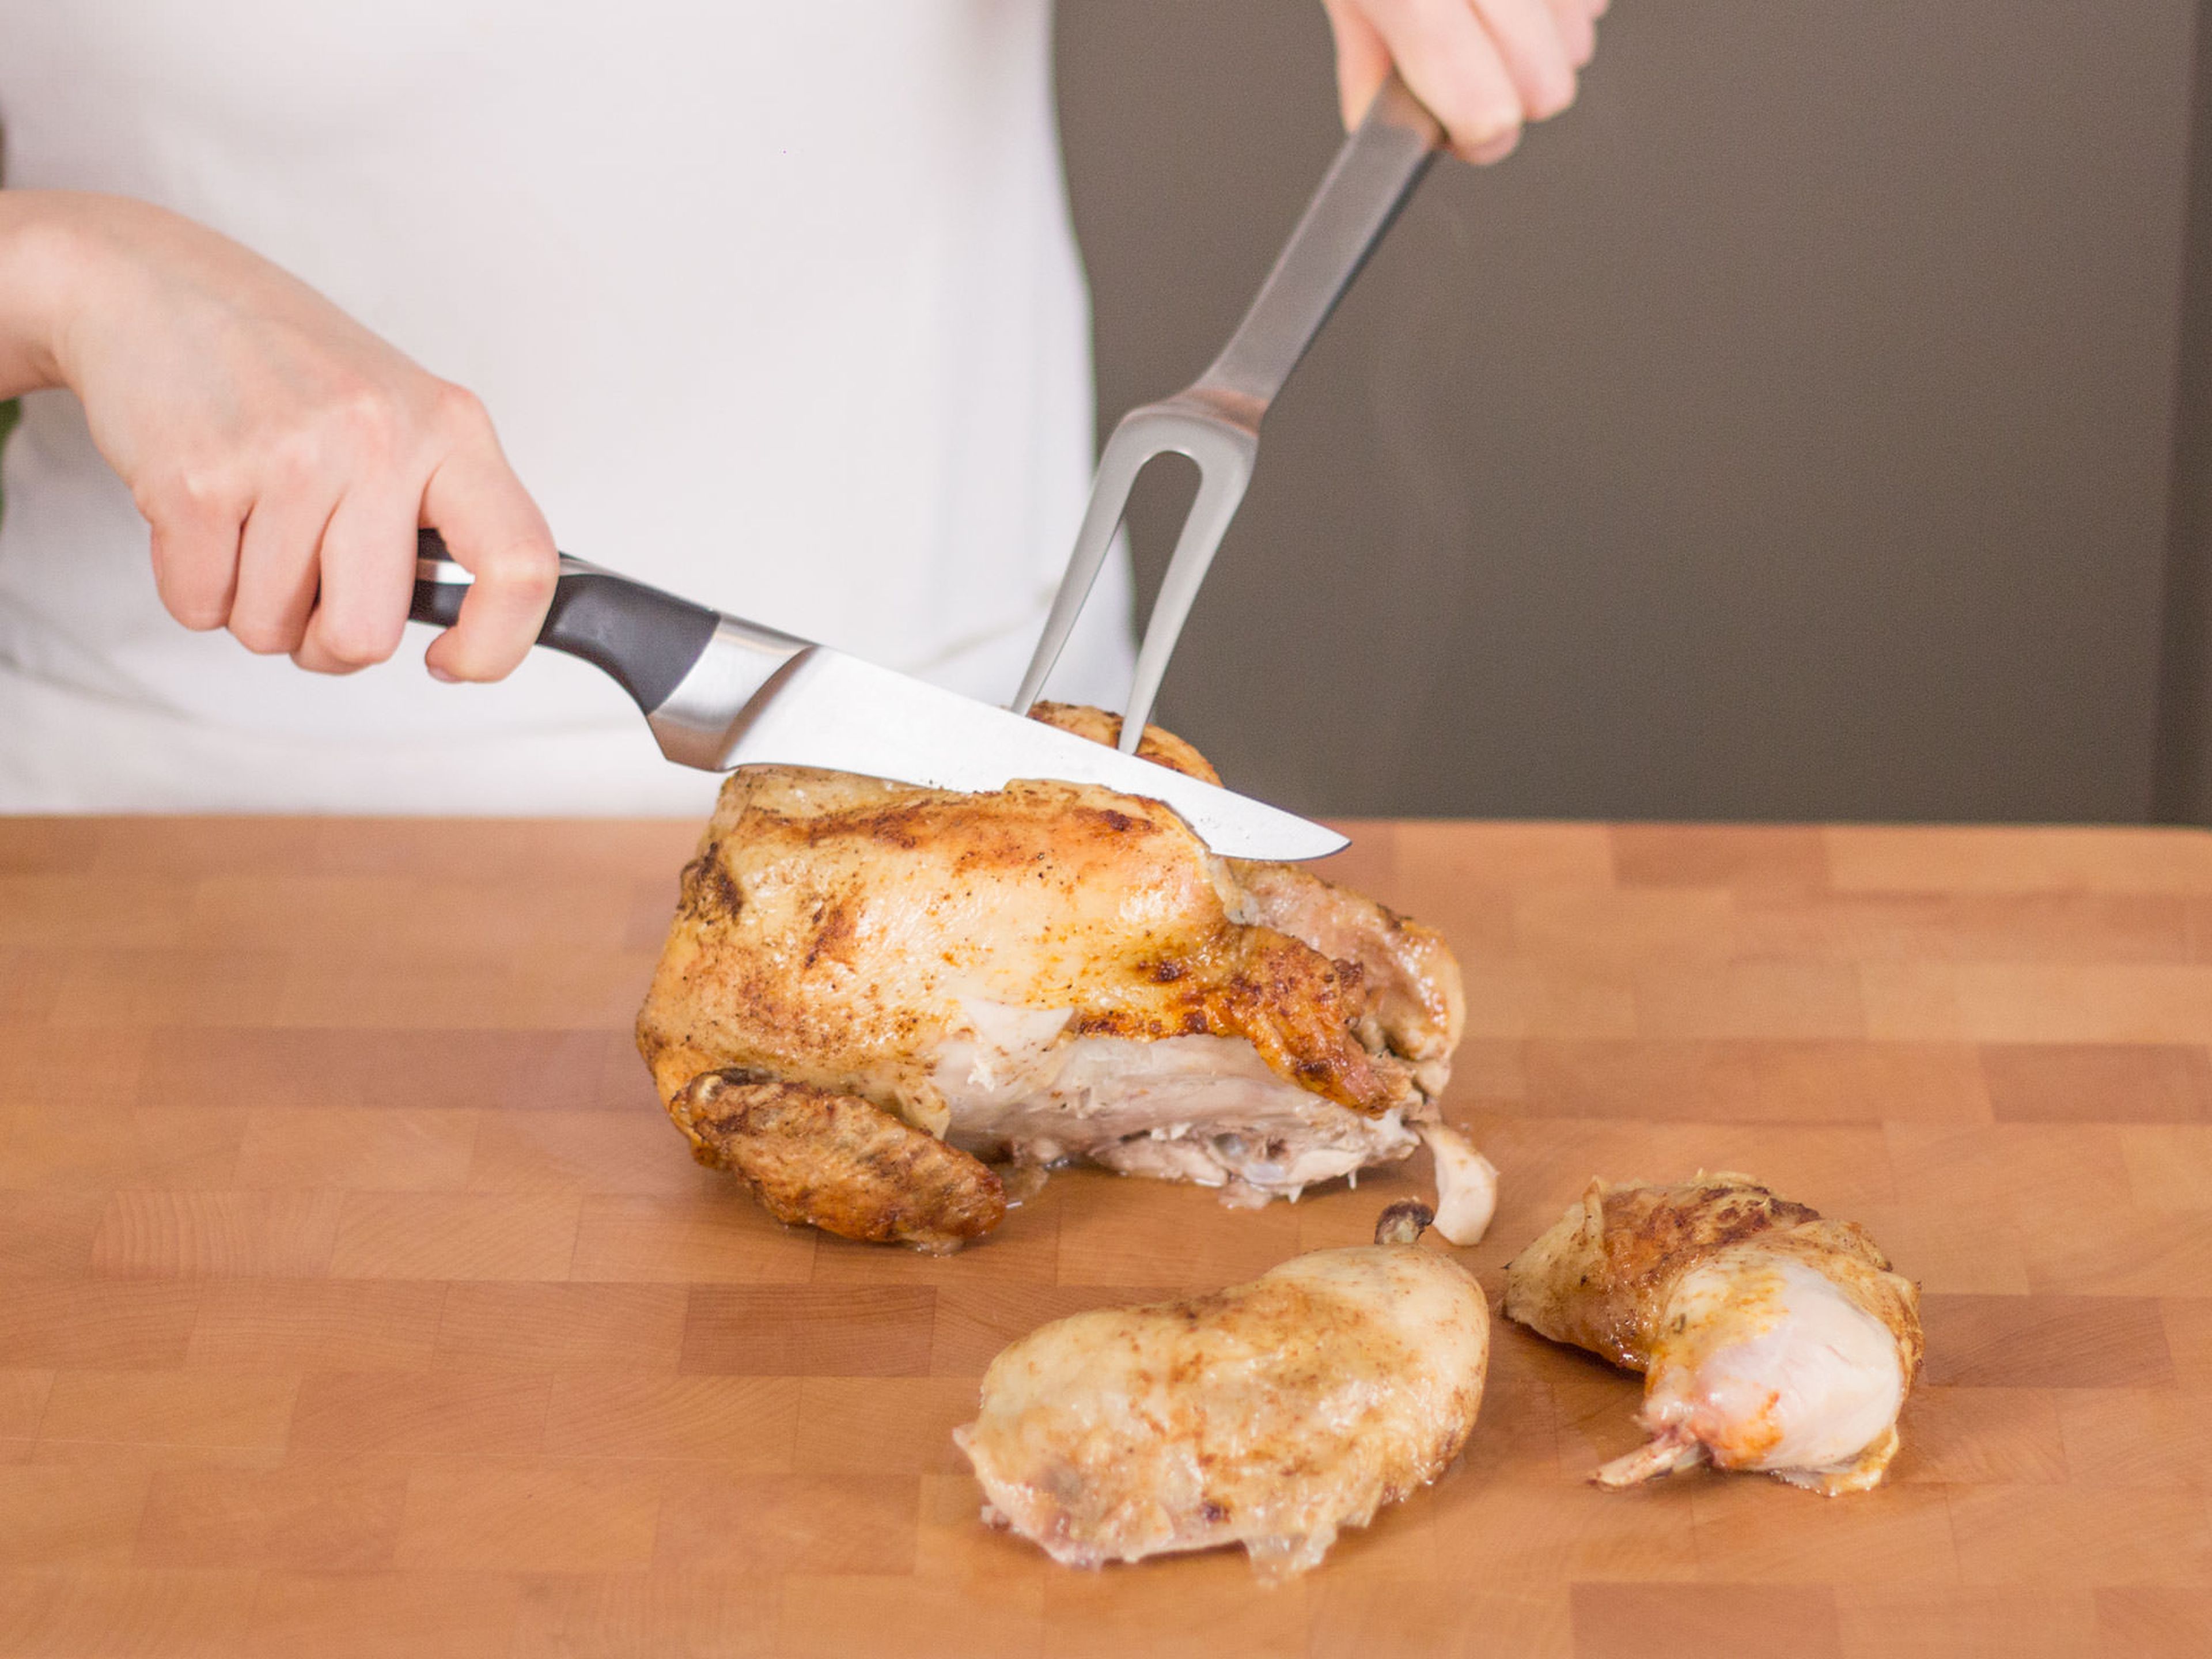 Remove from oven and let rest for approx. 5 - 10 min. Then, carve chicken into serving portions, as desired.